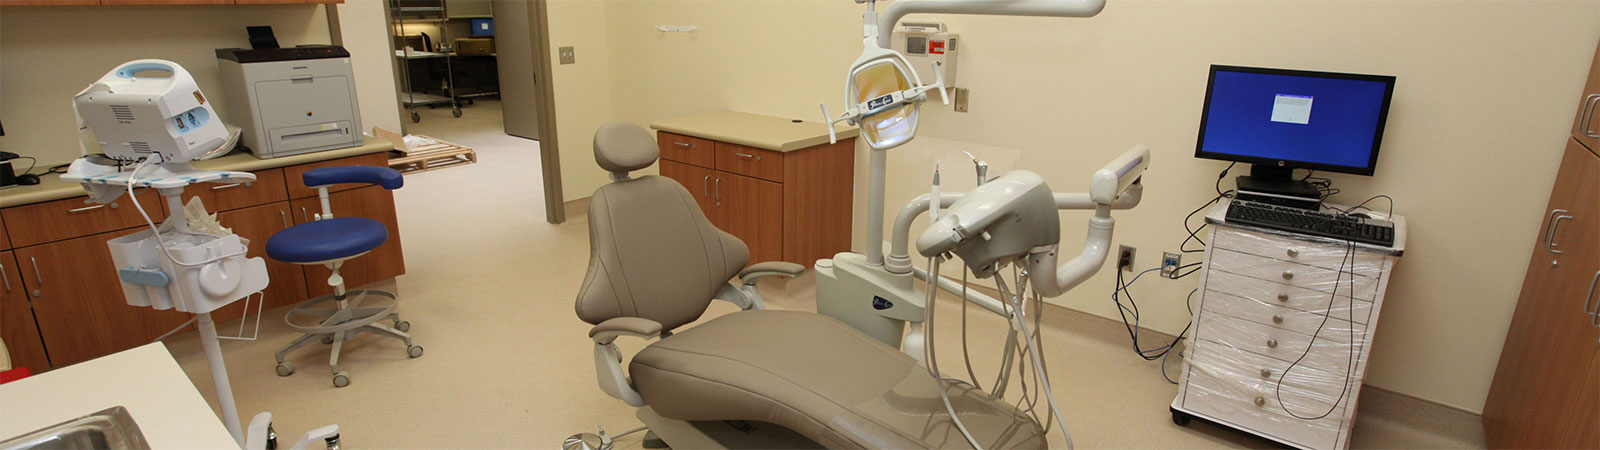 Various dental equipment, including a chair, mounted light and a computer monitor, at a CCHCS institution